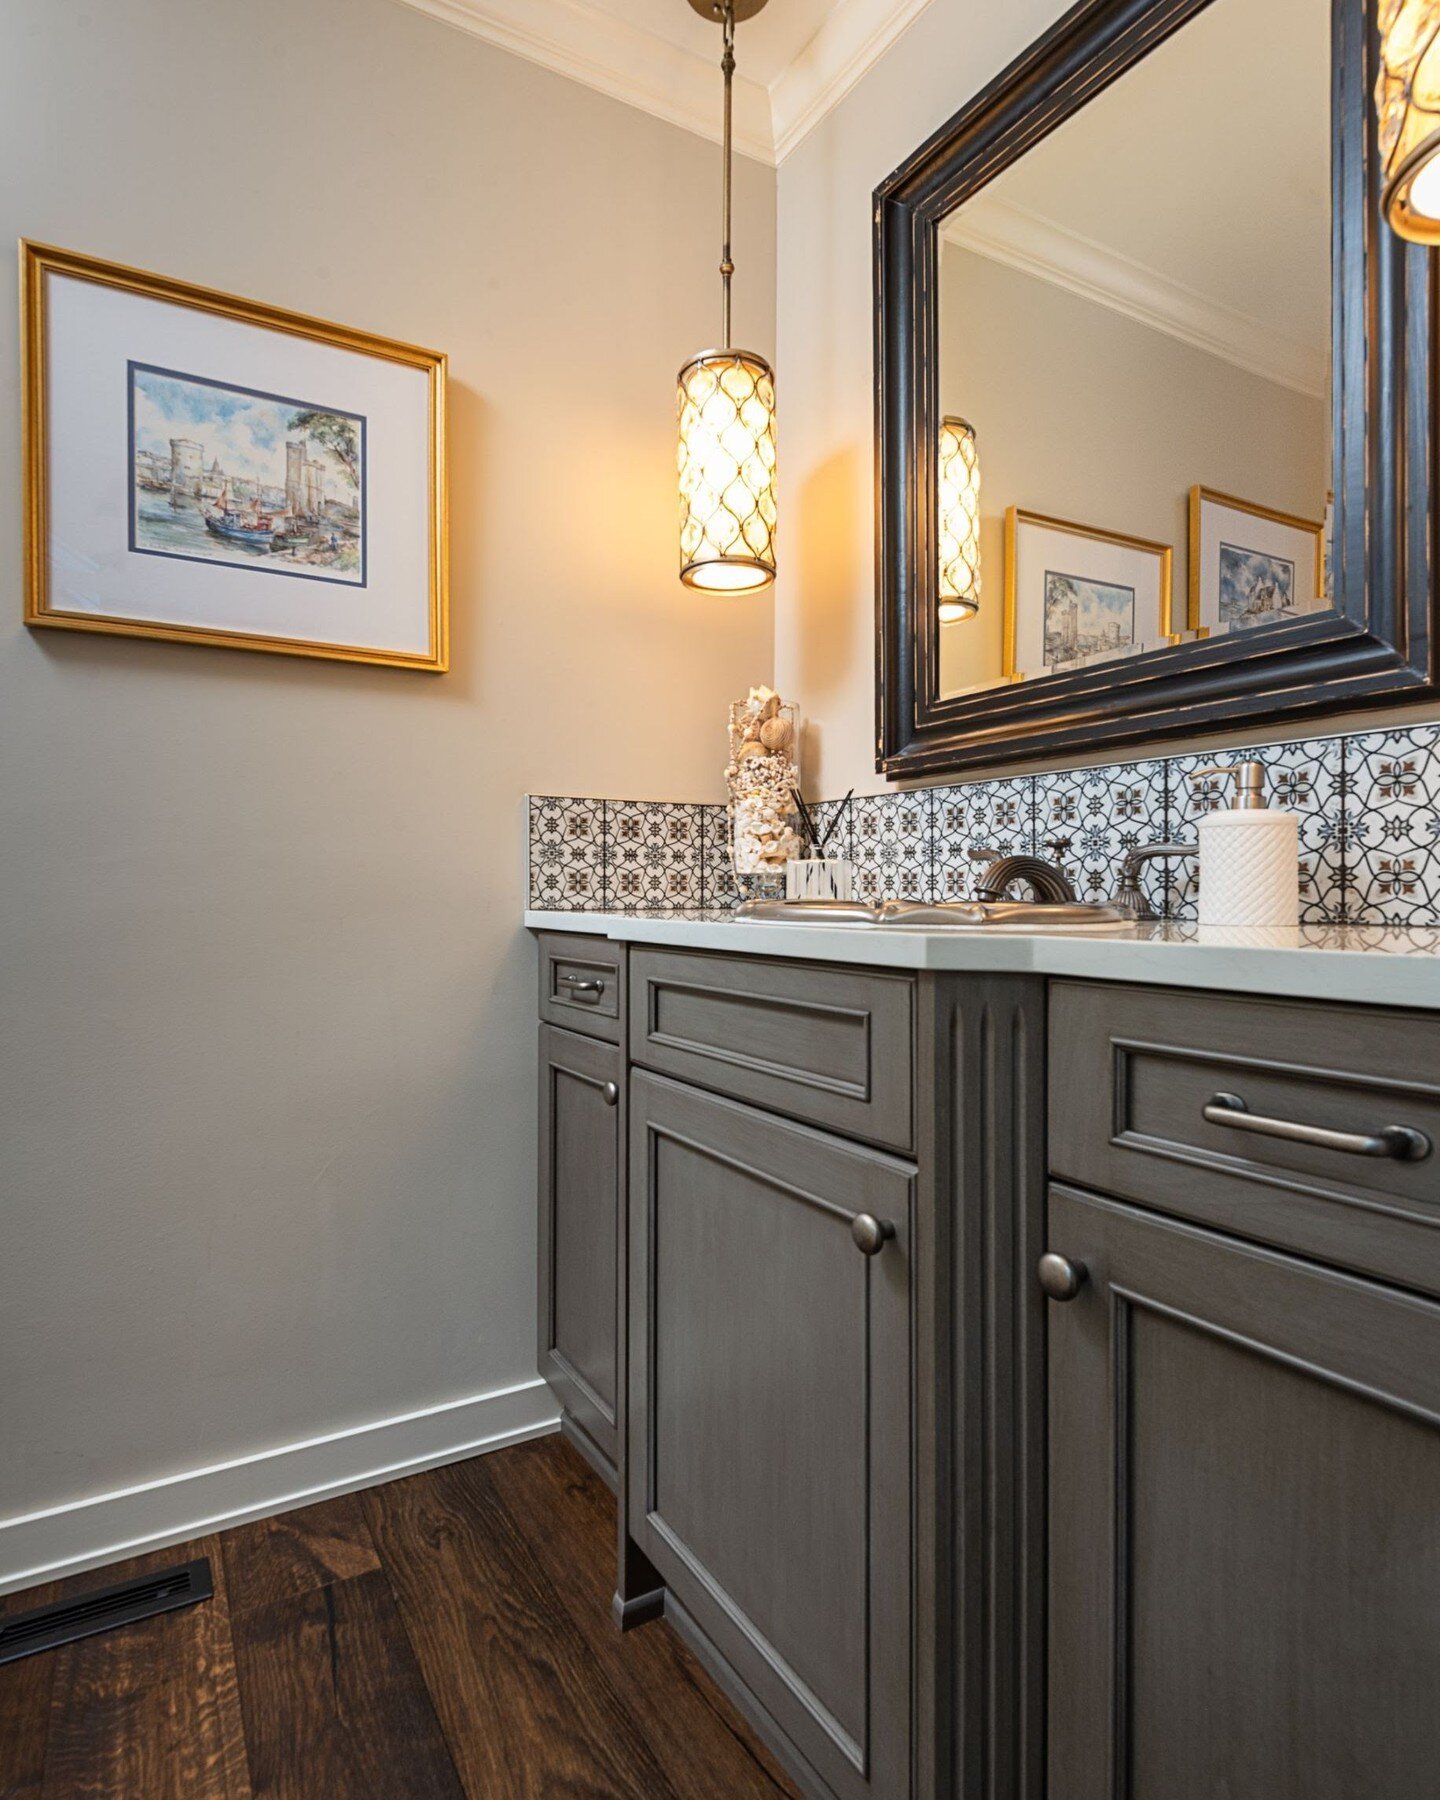 ✨ Powder room glow-up ✨ 
Check out this before and after!

#bathroomvanity #cabinetdesign #vanitydesign #vanitycabinets #cabinethardware #pnwdesign #pnw #interiordesign #designideas #bathroomremodel #remodel #bathroomcabinets #cabinetry